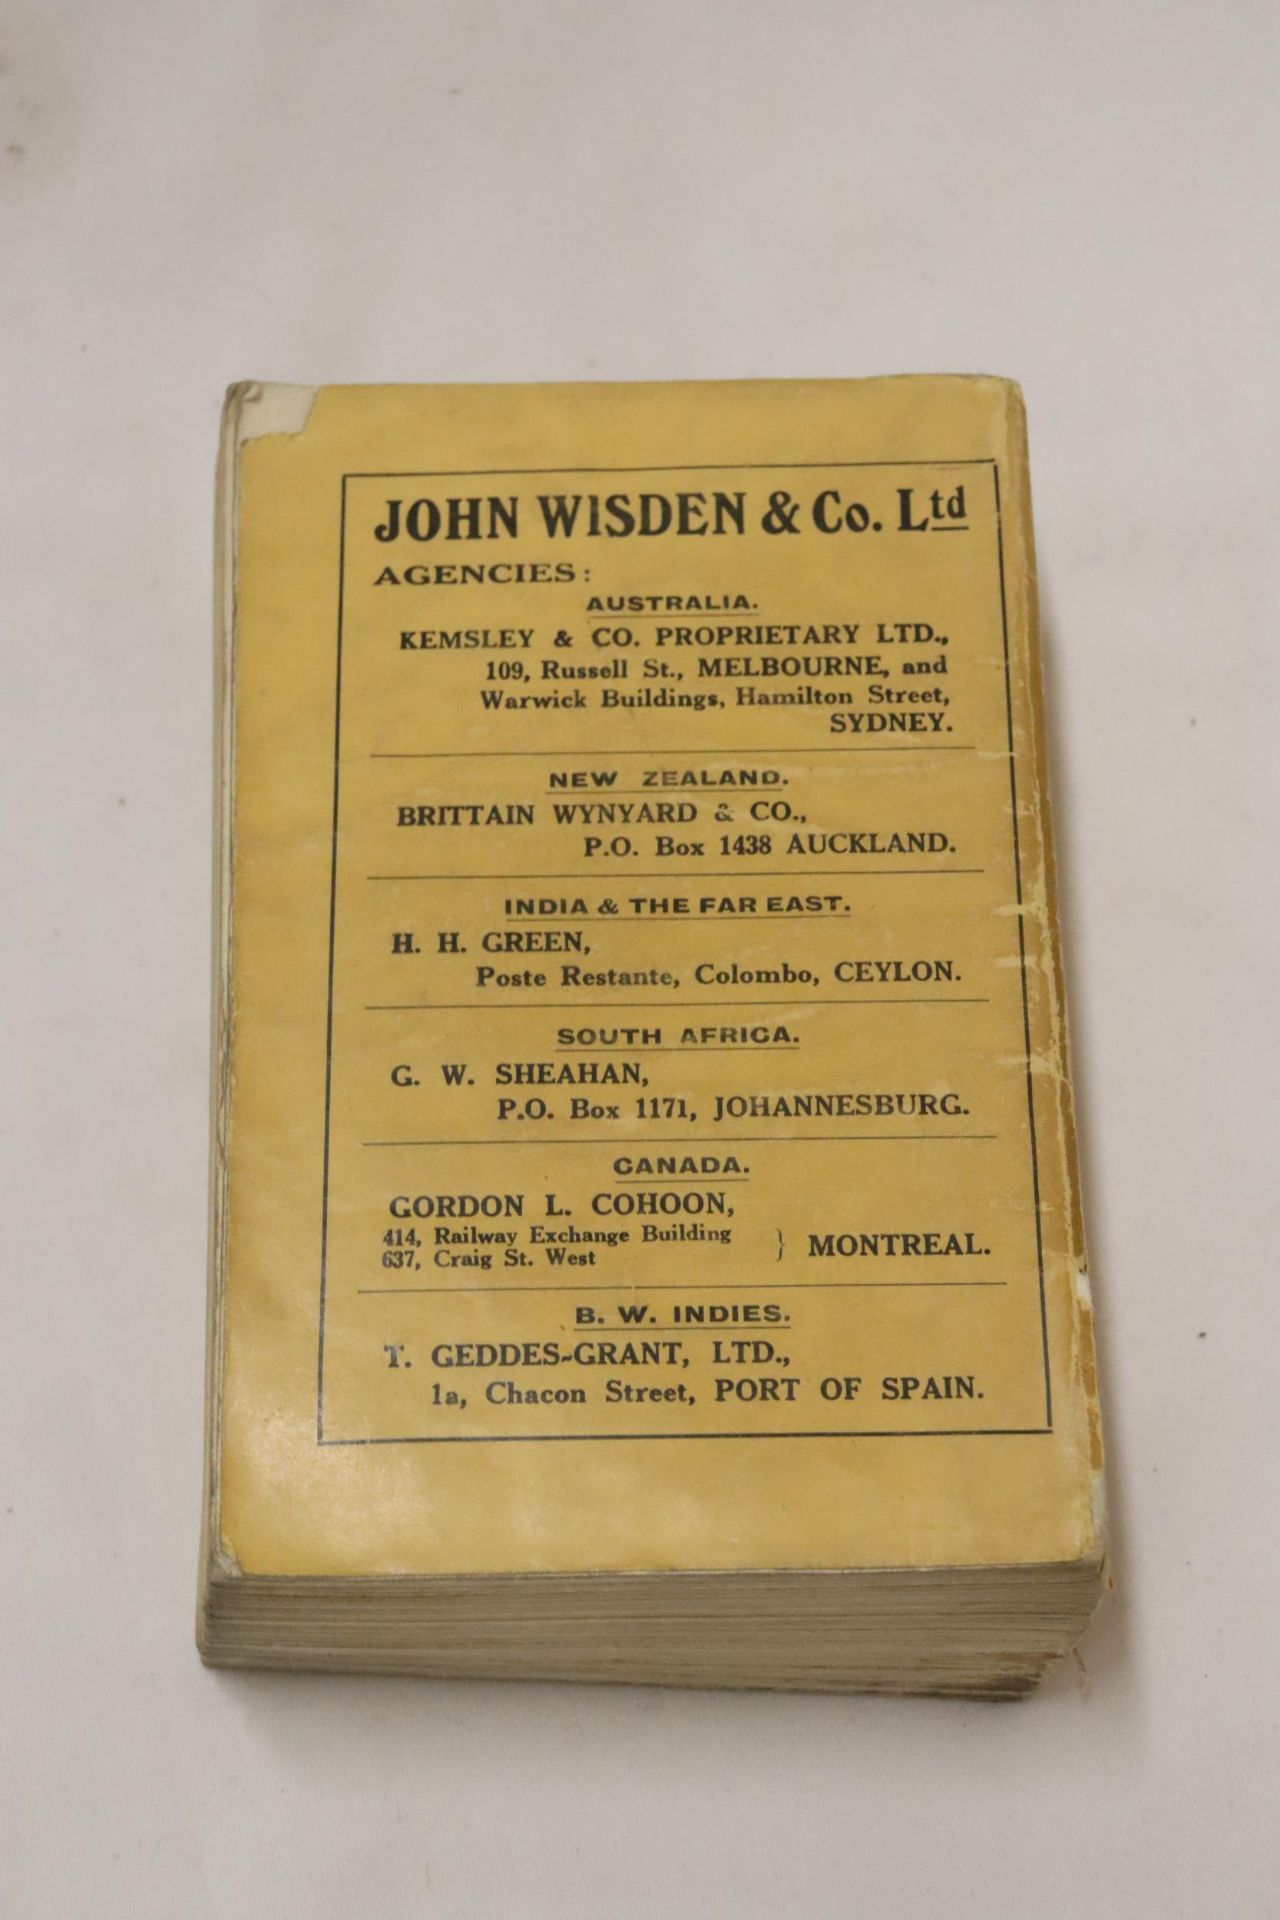 A 1932 COPY OF WISDEN'S CRICKETER'S ALMANACK. THIS COPY IS IN USED CONDITION, MISSING PART OF THE - Image 3 of 4